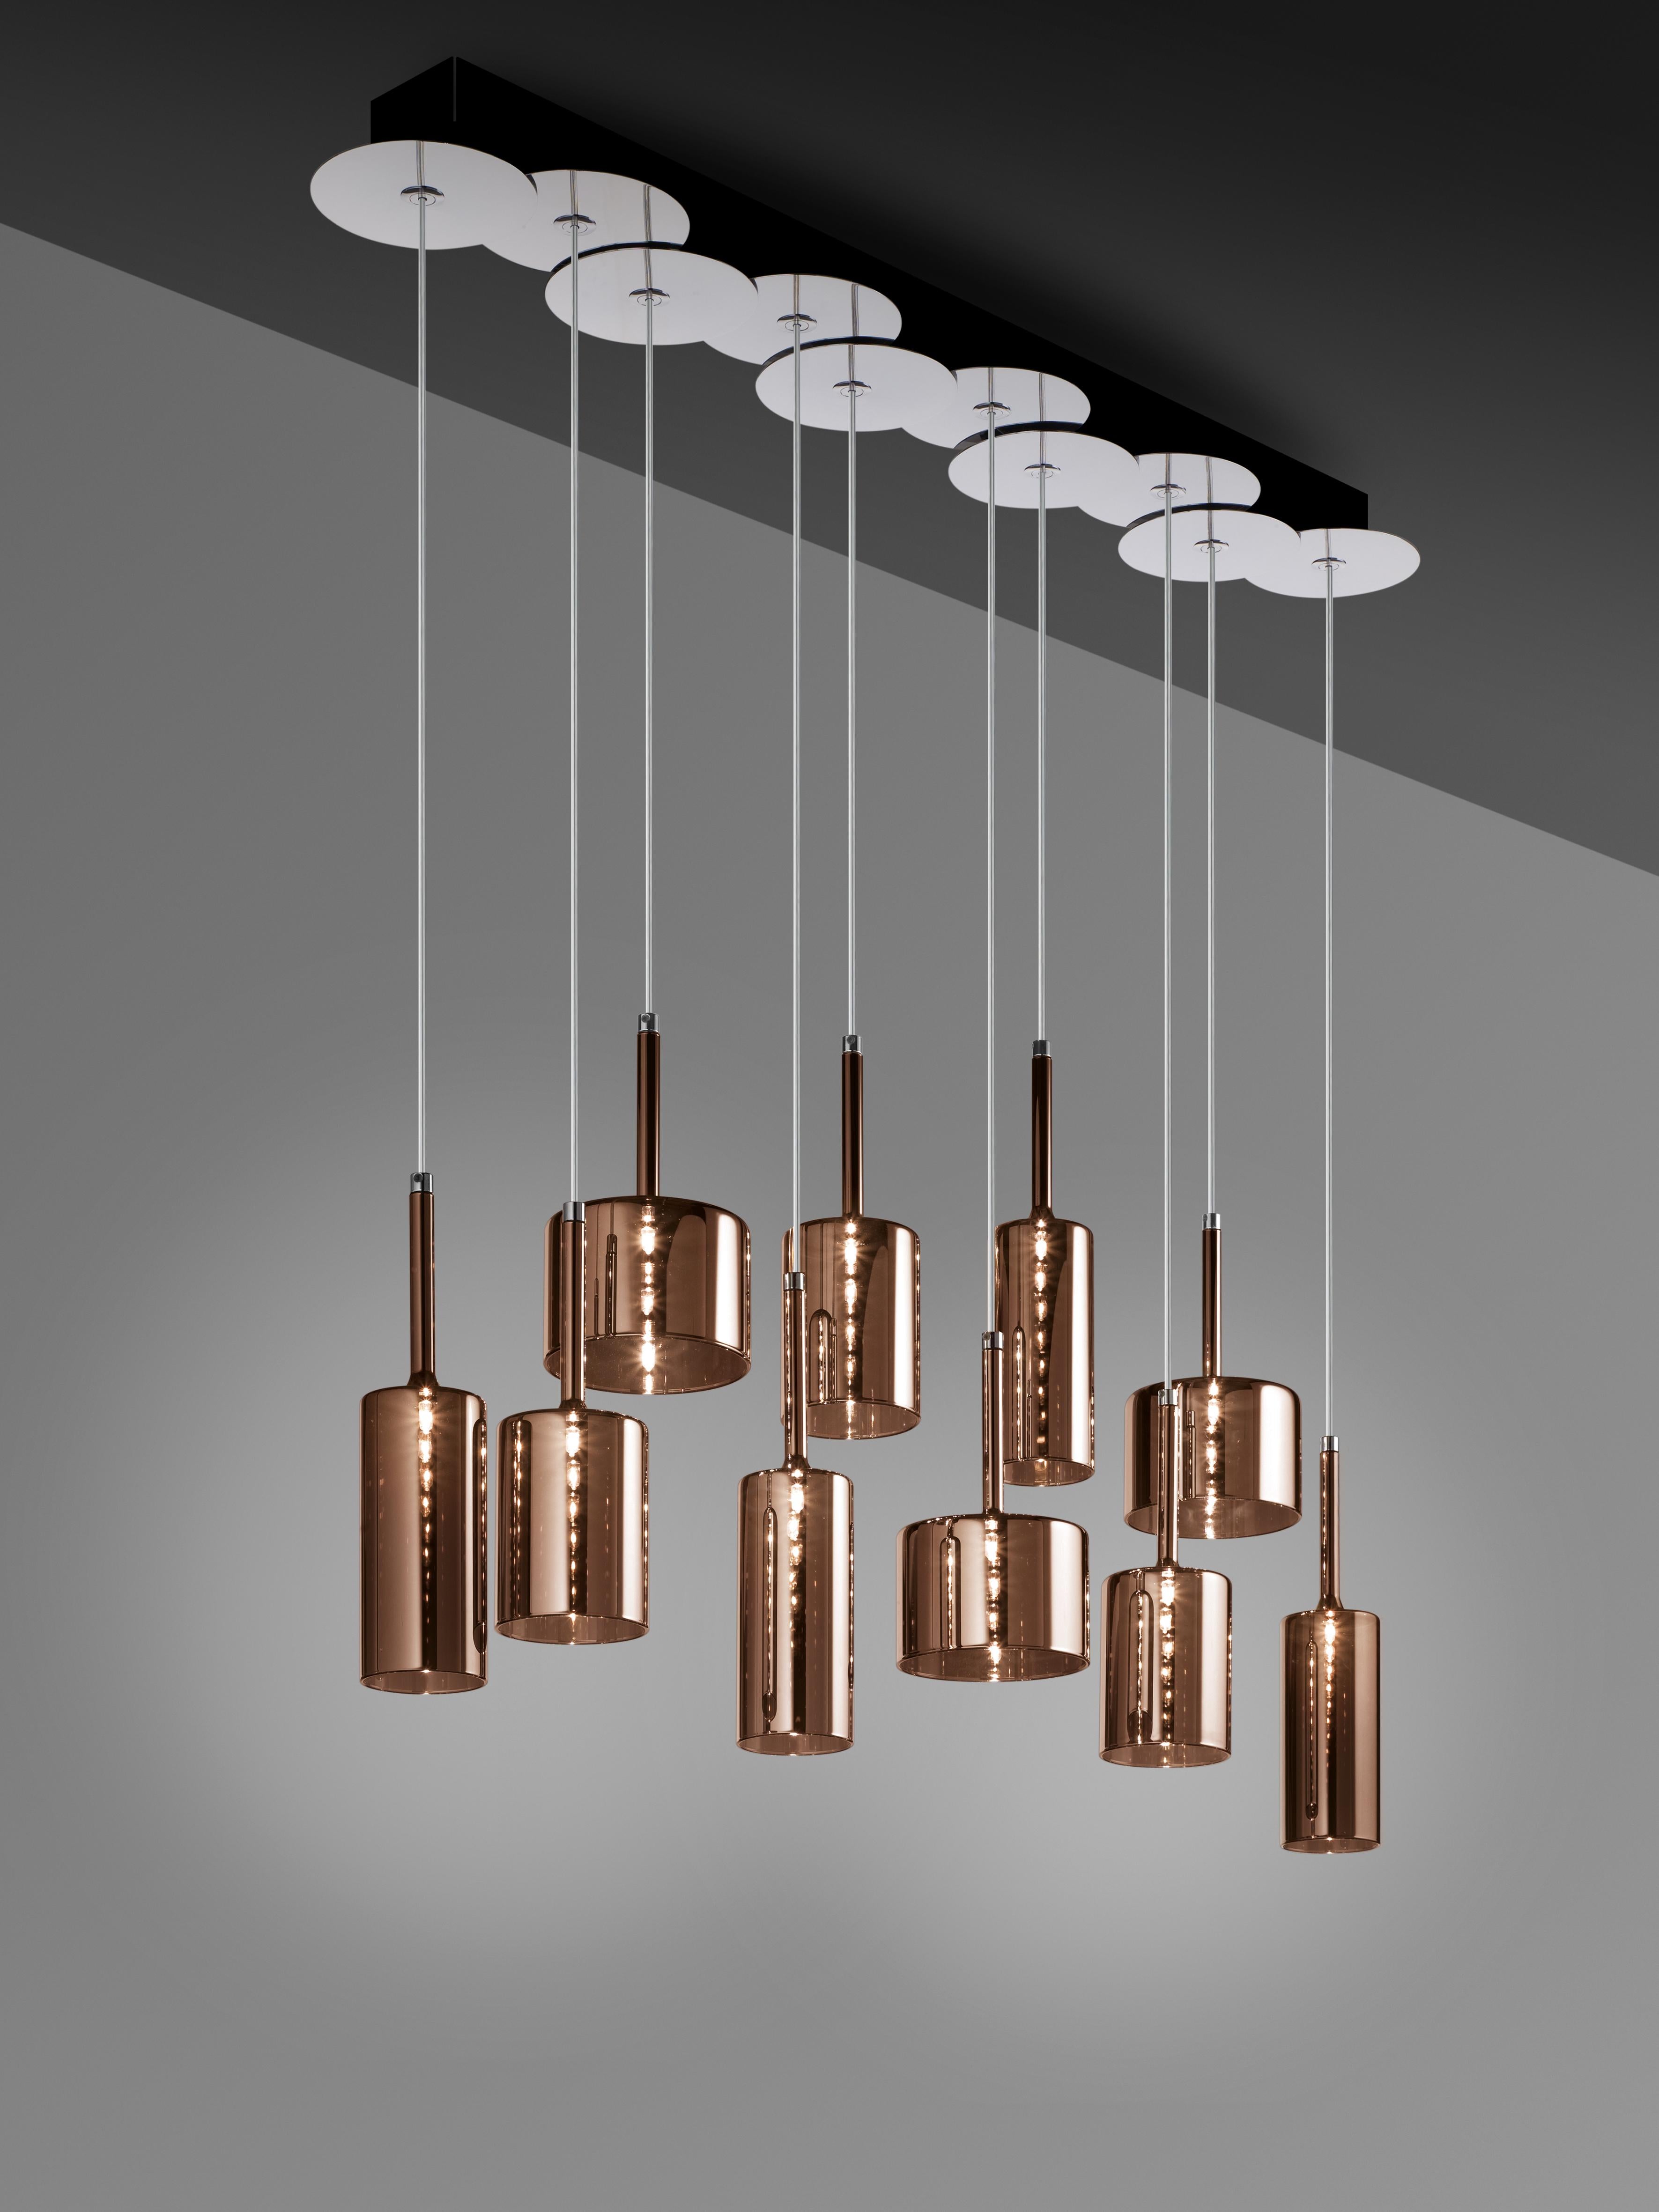 Axolight Spillray 10 Light Pendant Lamp with Chrome Metal Body in Bronze by Manuel & Vanessa Vivian

The delicacy of the glass expresses a pure but gently refined light. With its clean and essential design, Spillray is able to illuminate any space